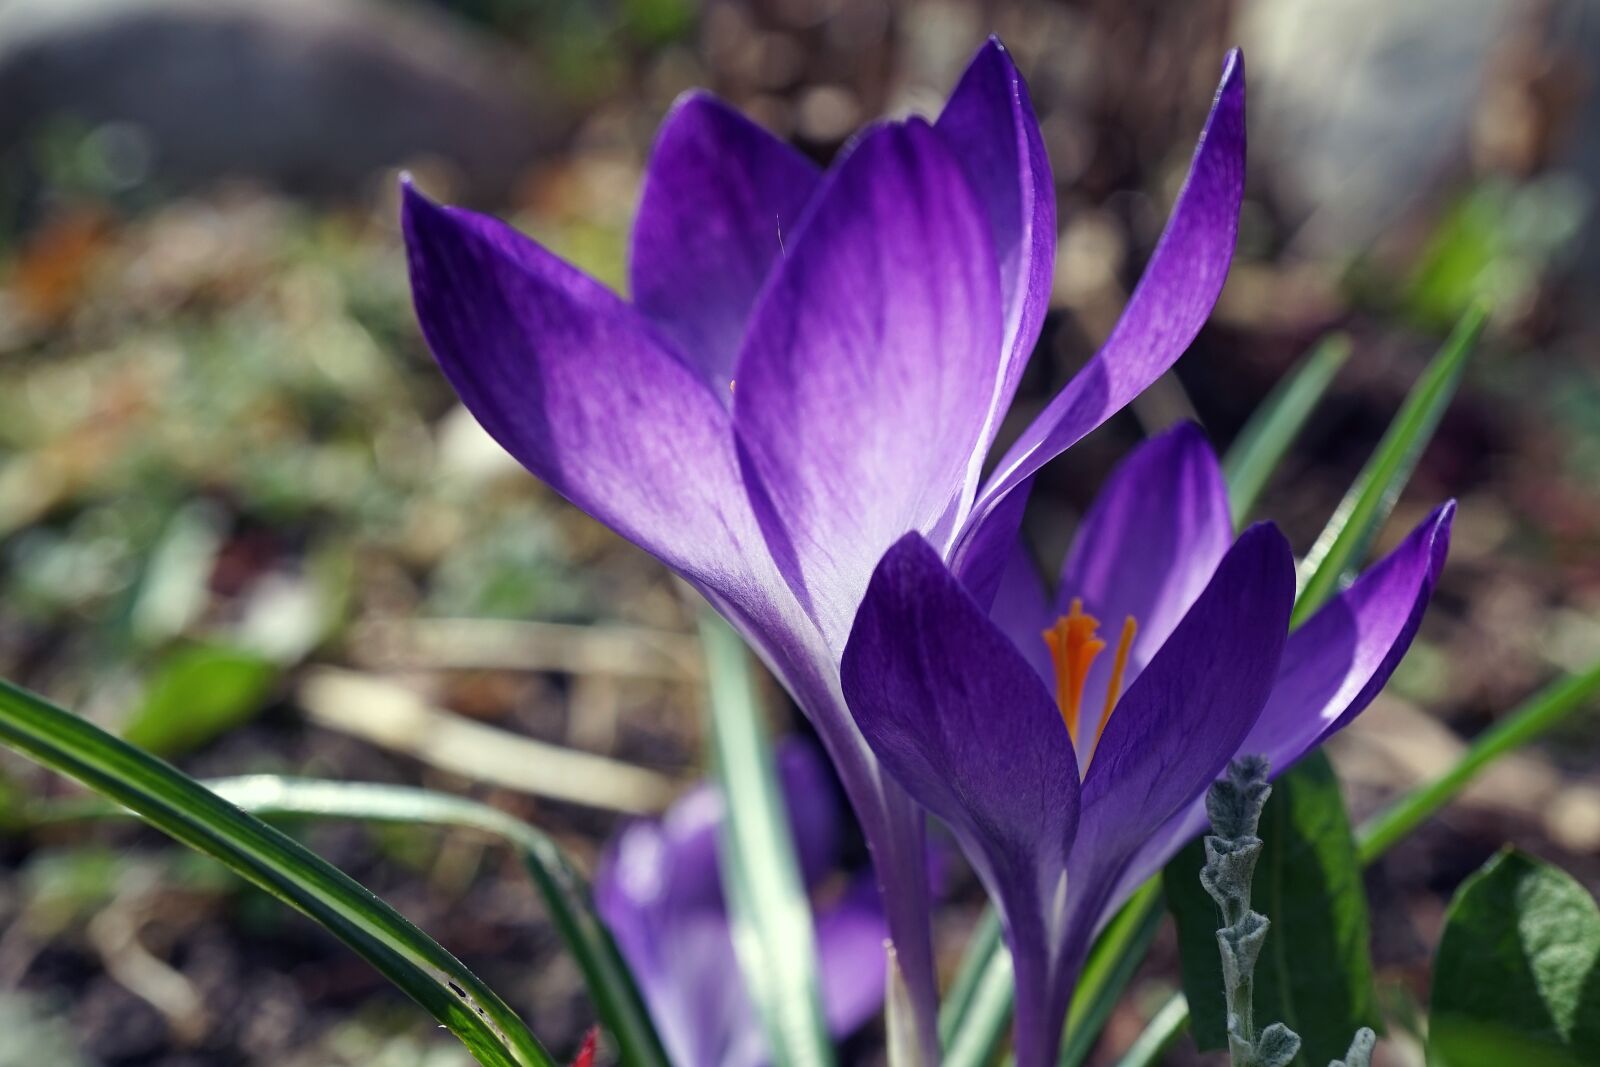 Sony a7 sample photo. Crocus, spring, early bloomer photography